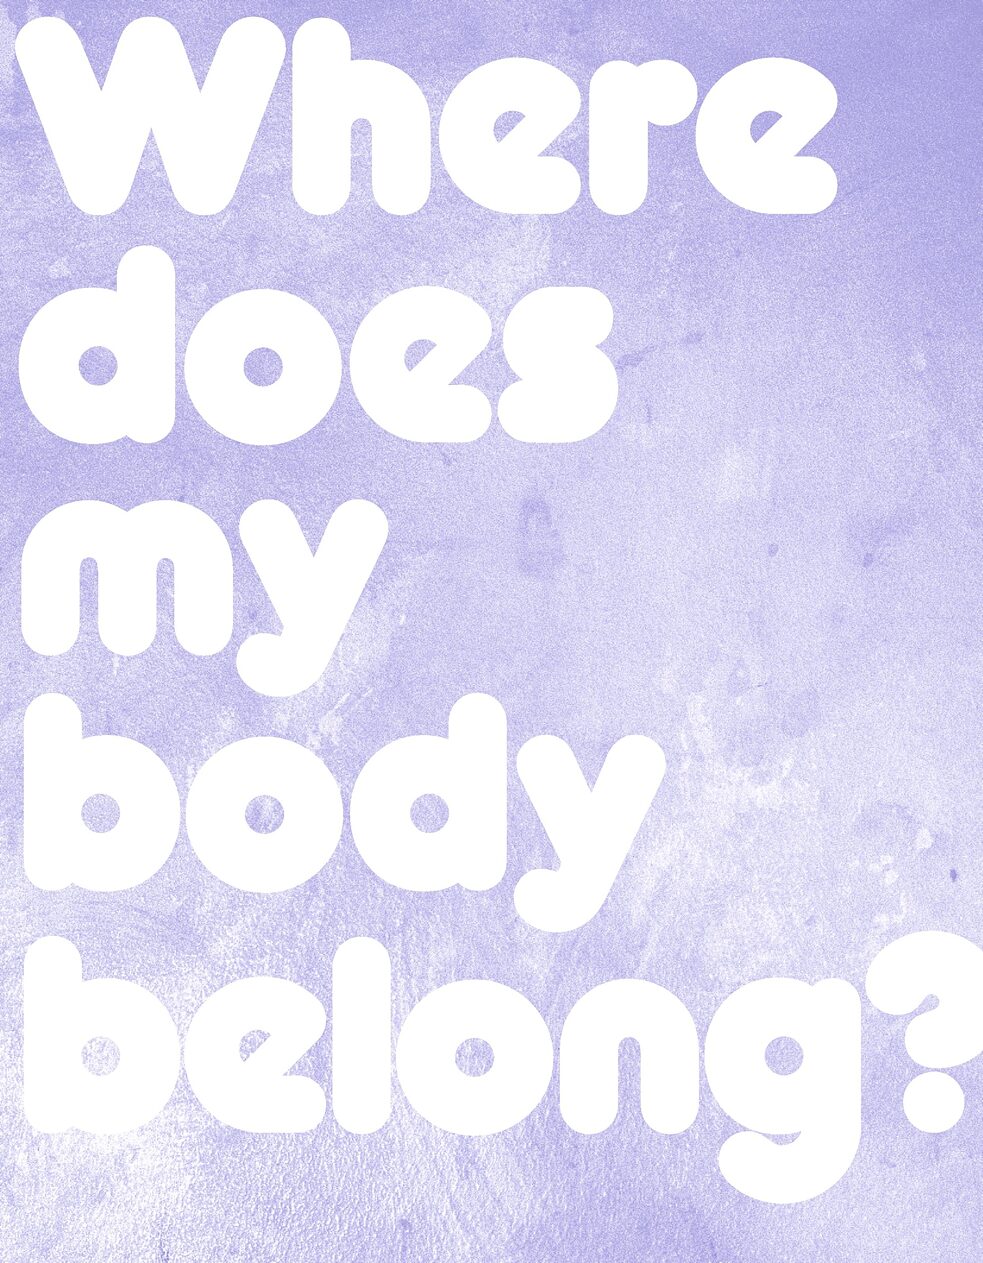 Where does my body belong (Frage 3)